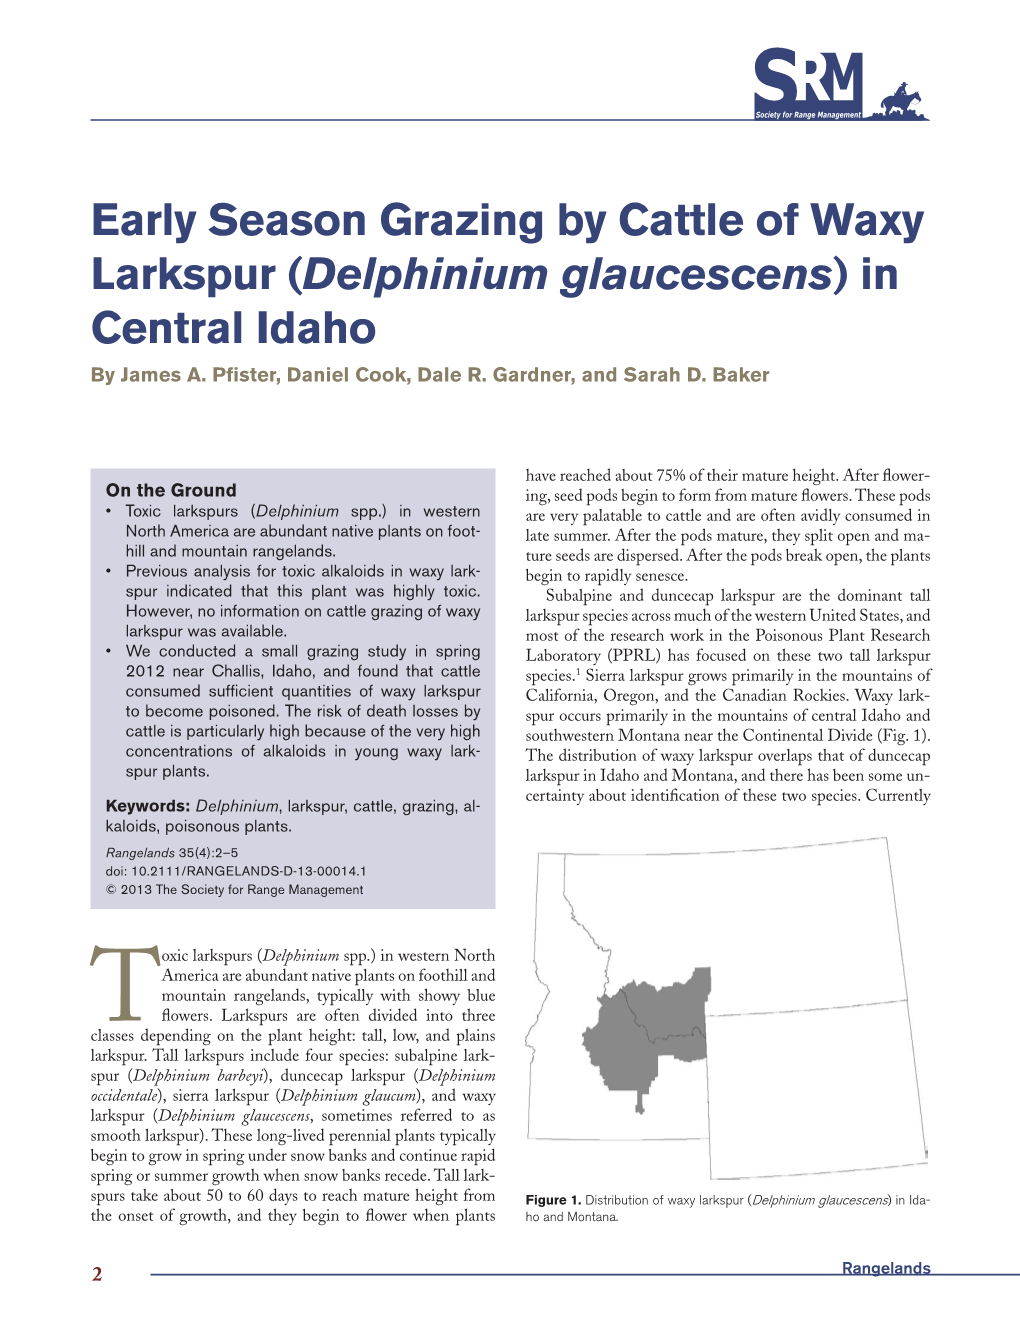 Early Season Grazing by Cattle of Waxy Larkspur (Delphinium Glaucescens) in Central Idaho by James A